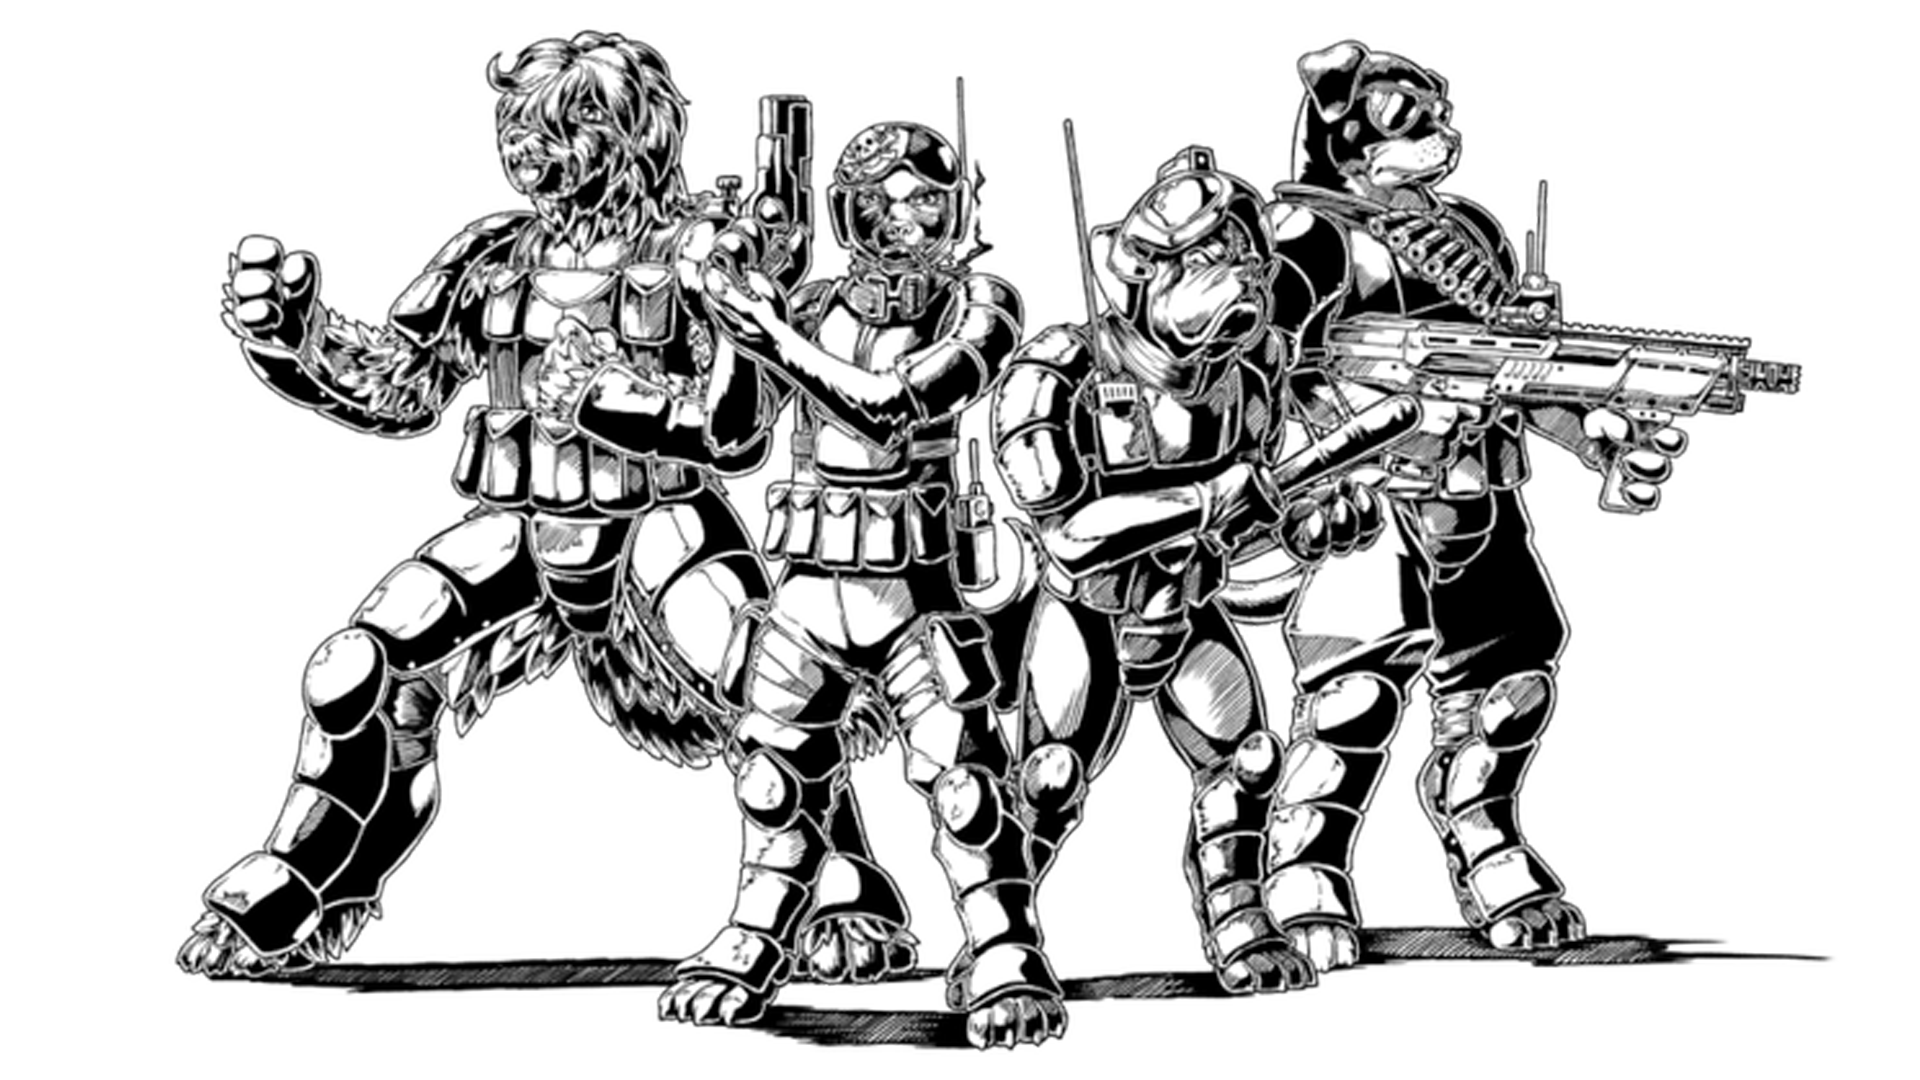 Artwork for Mutants for the Next sourcebook featuring a team of mutated animal soldiers